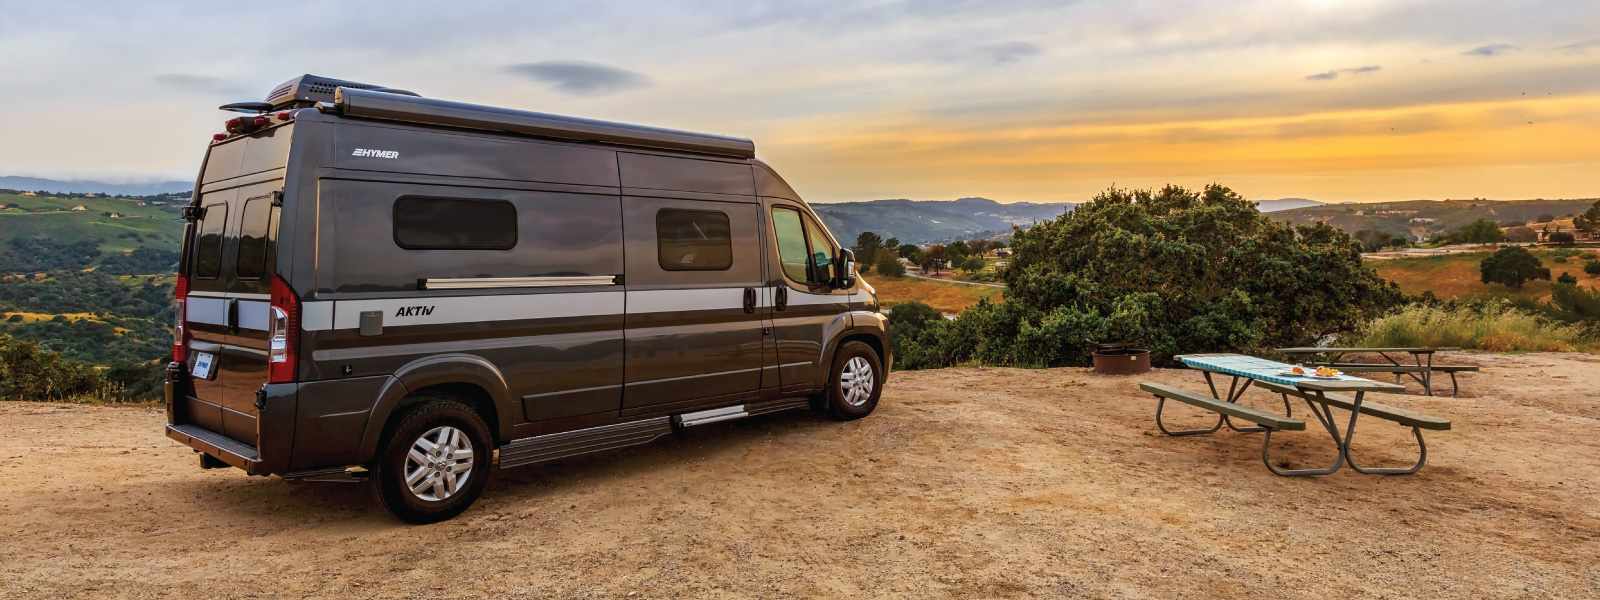 The Redesigned Campervan of 2017